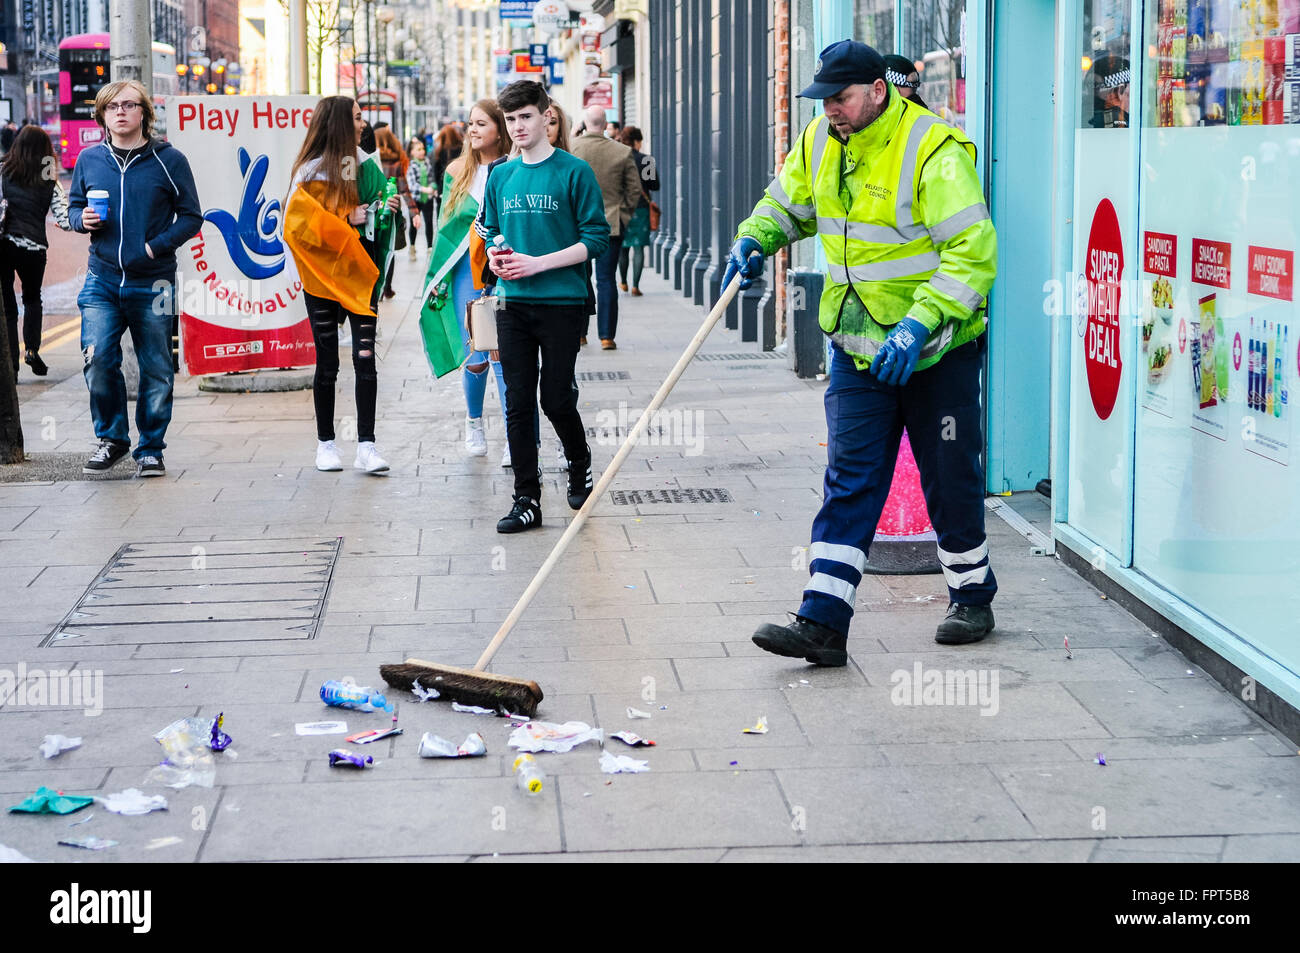 A council worker clears footpaths of a large amount of litter from a footpath after a large crowd has dispersed. Stock Photo